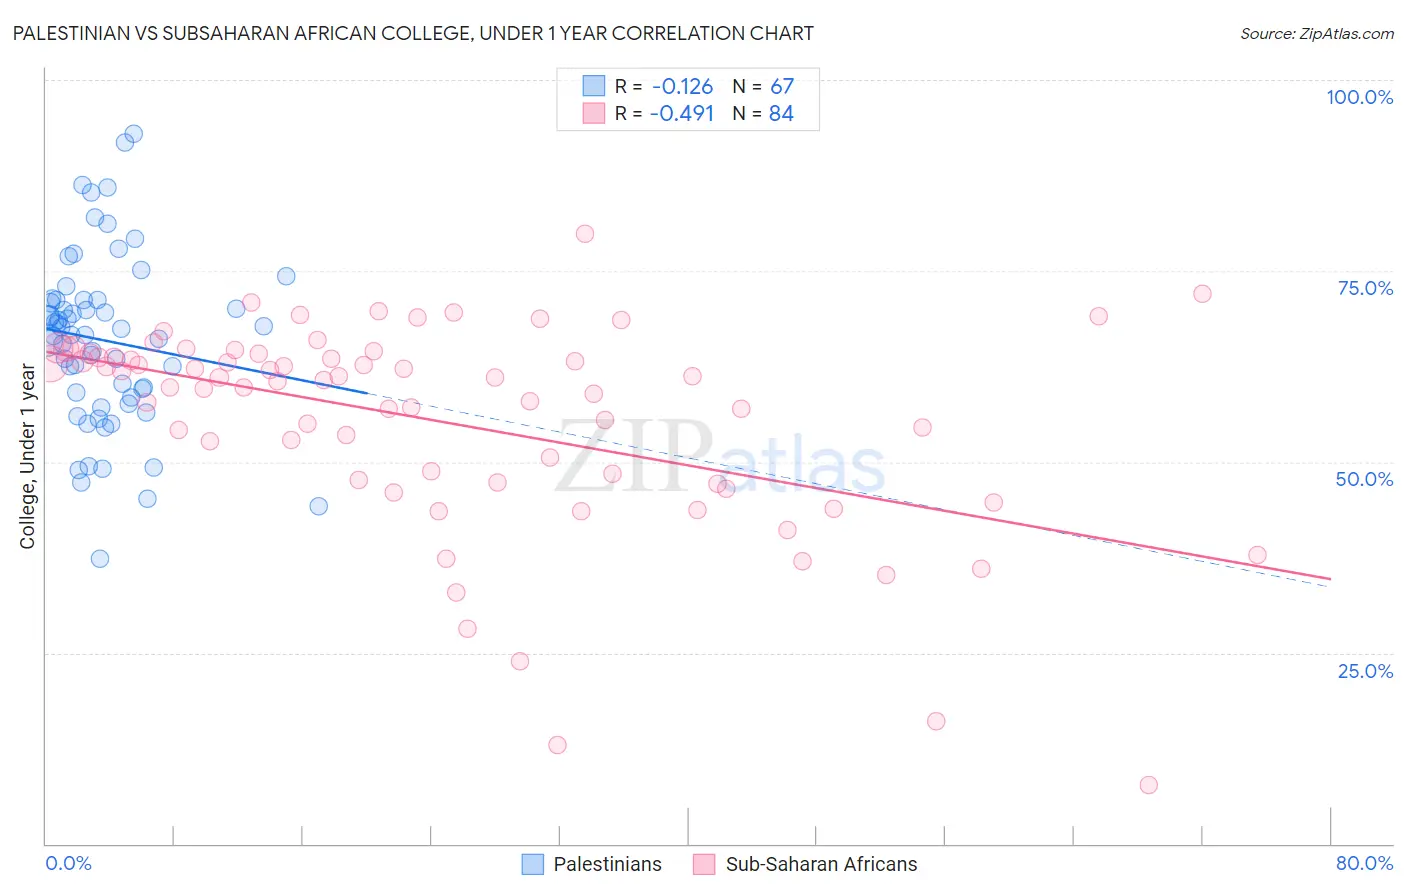 Palestinian vs Subsaharan African College, Under 1 year